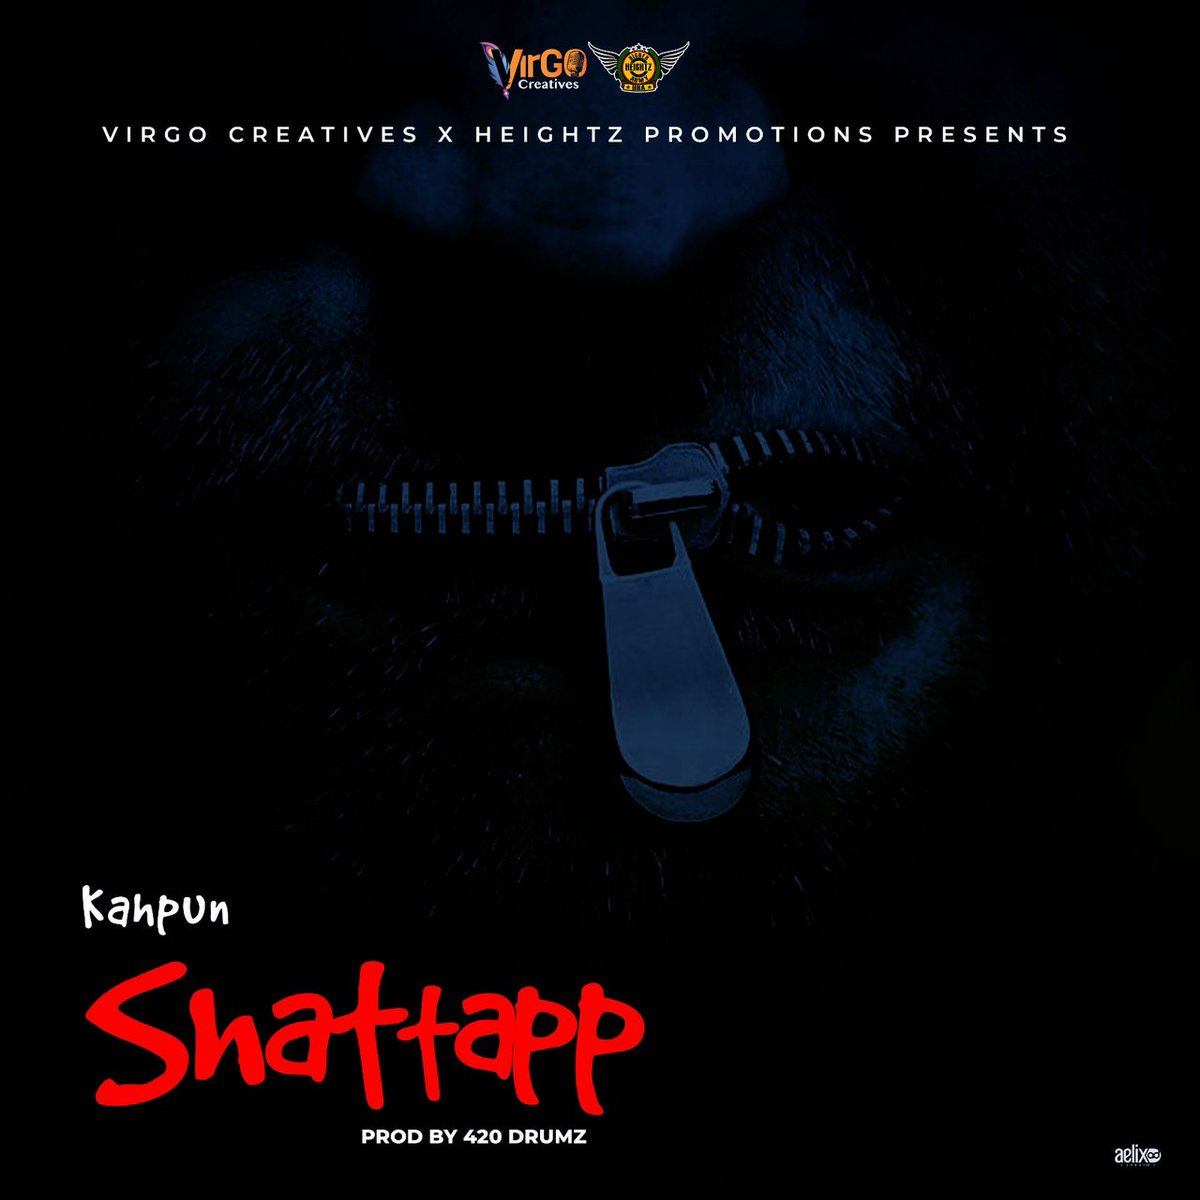 🎶 New Music Alert! @Kahpun_'s new song 'Shattapp,' produced by @420Drumz, is coming soon! 🚀 Pre-save now to be among the first to experience this thrilling track. 🔗 Pre-Save Link: distrokid.com/hyperfollow/ka… #heightzpromotions #VirgoCreatives #Shattapp #Kahpun #NewMusicAlert